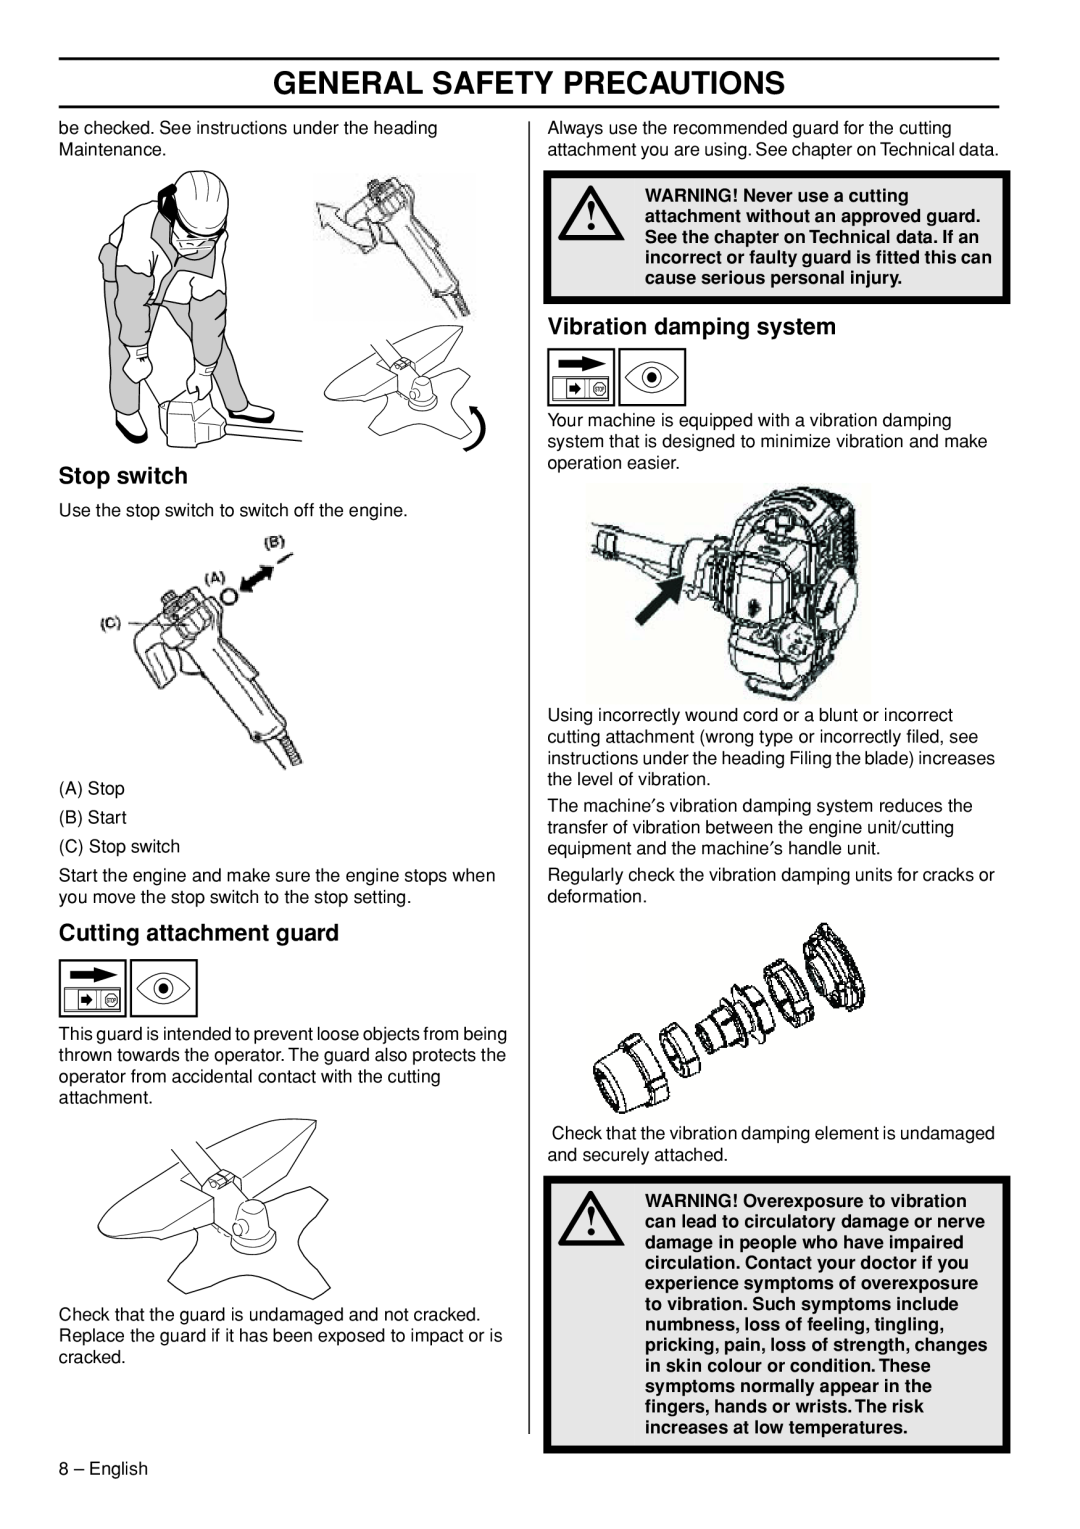 Husqvarna 143R-II manual Stop switch, Cutting attachment guard, Vibration damping system, WARNING! Never use a cutting 